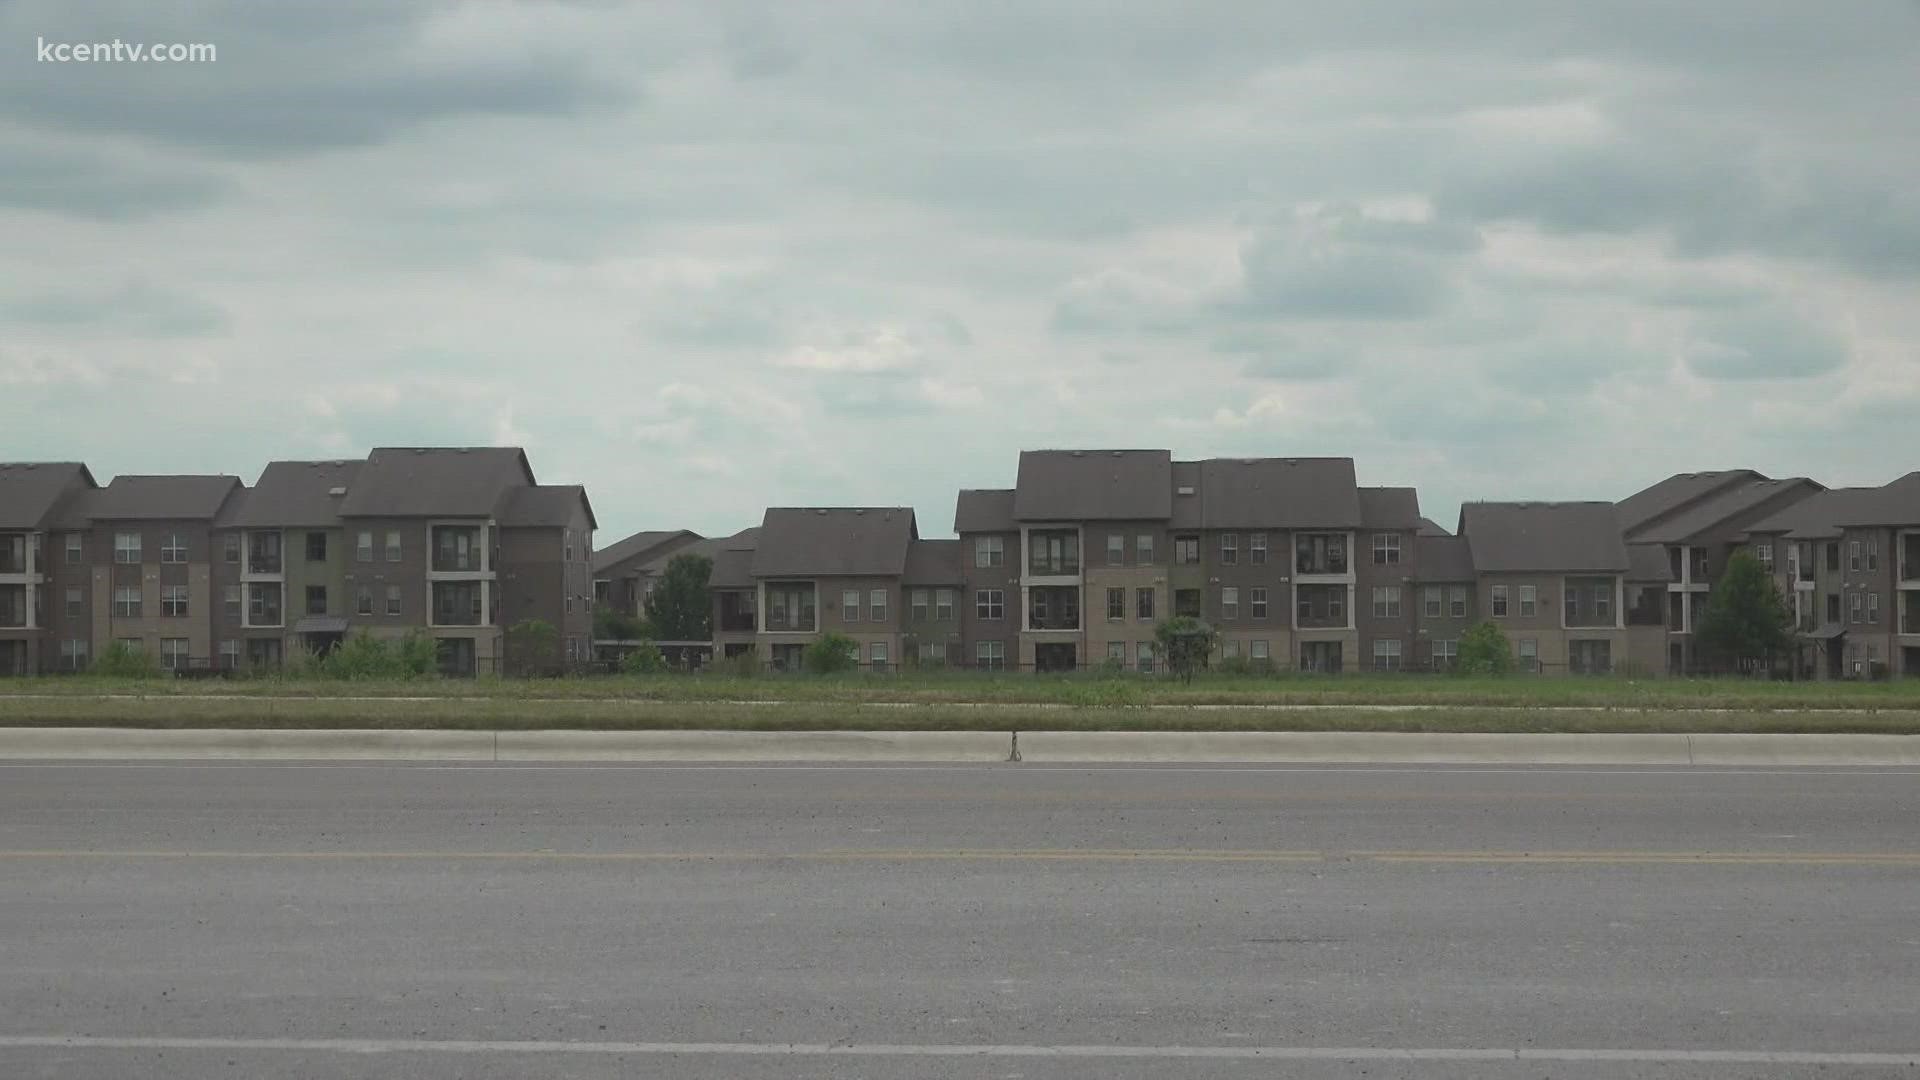 Central Texas housing experts say rent has risen at least 25 percent in 18 months and most apartment complexes are around 95 percent occupied.